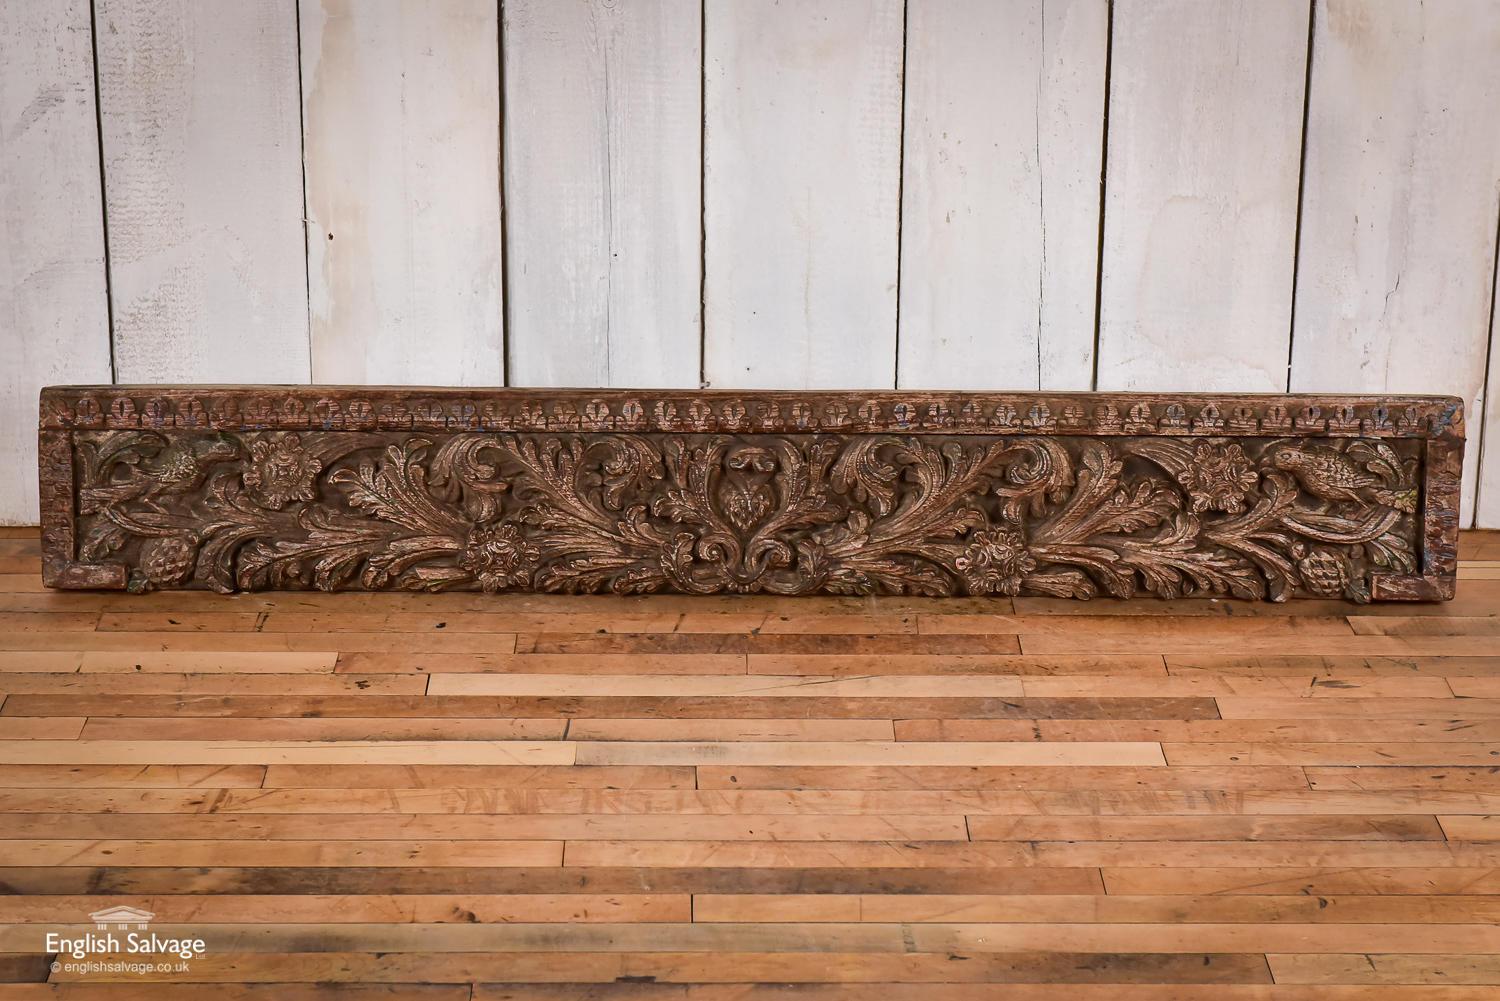 Antique hand carved teak panel with foliate scrolling and acanthus patination. Some wear to wood commensurate with age.